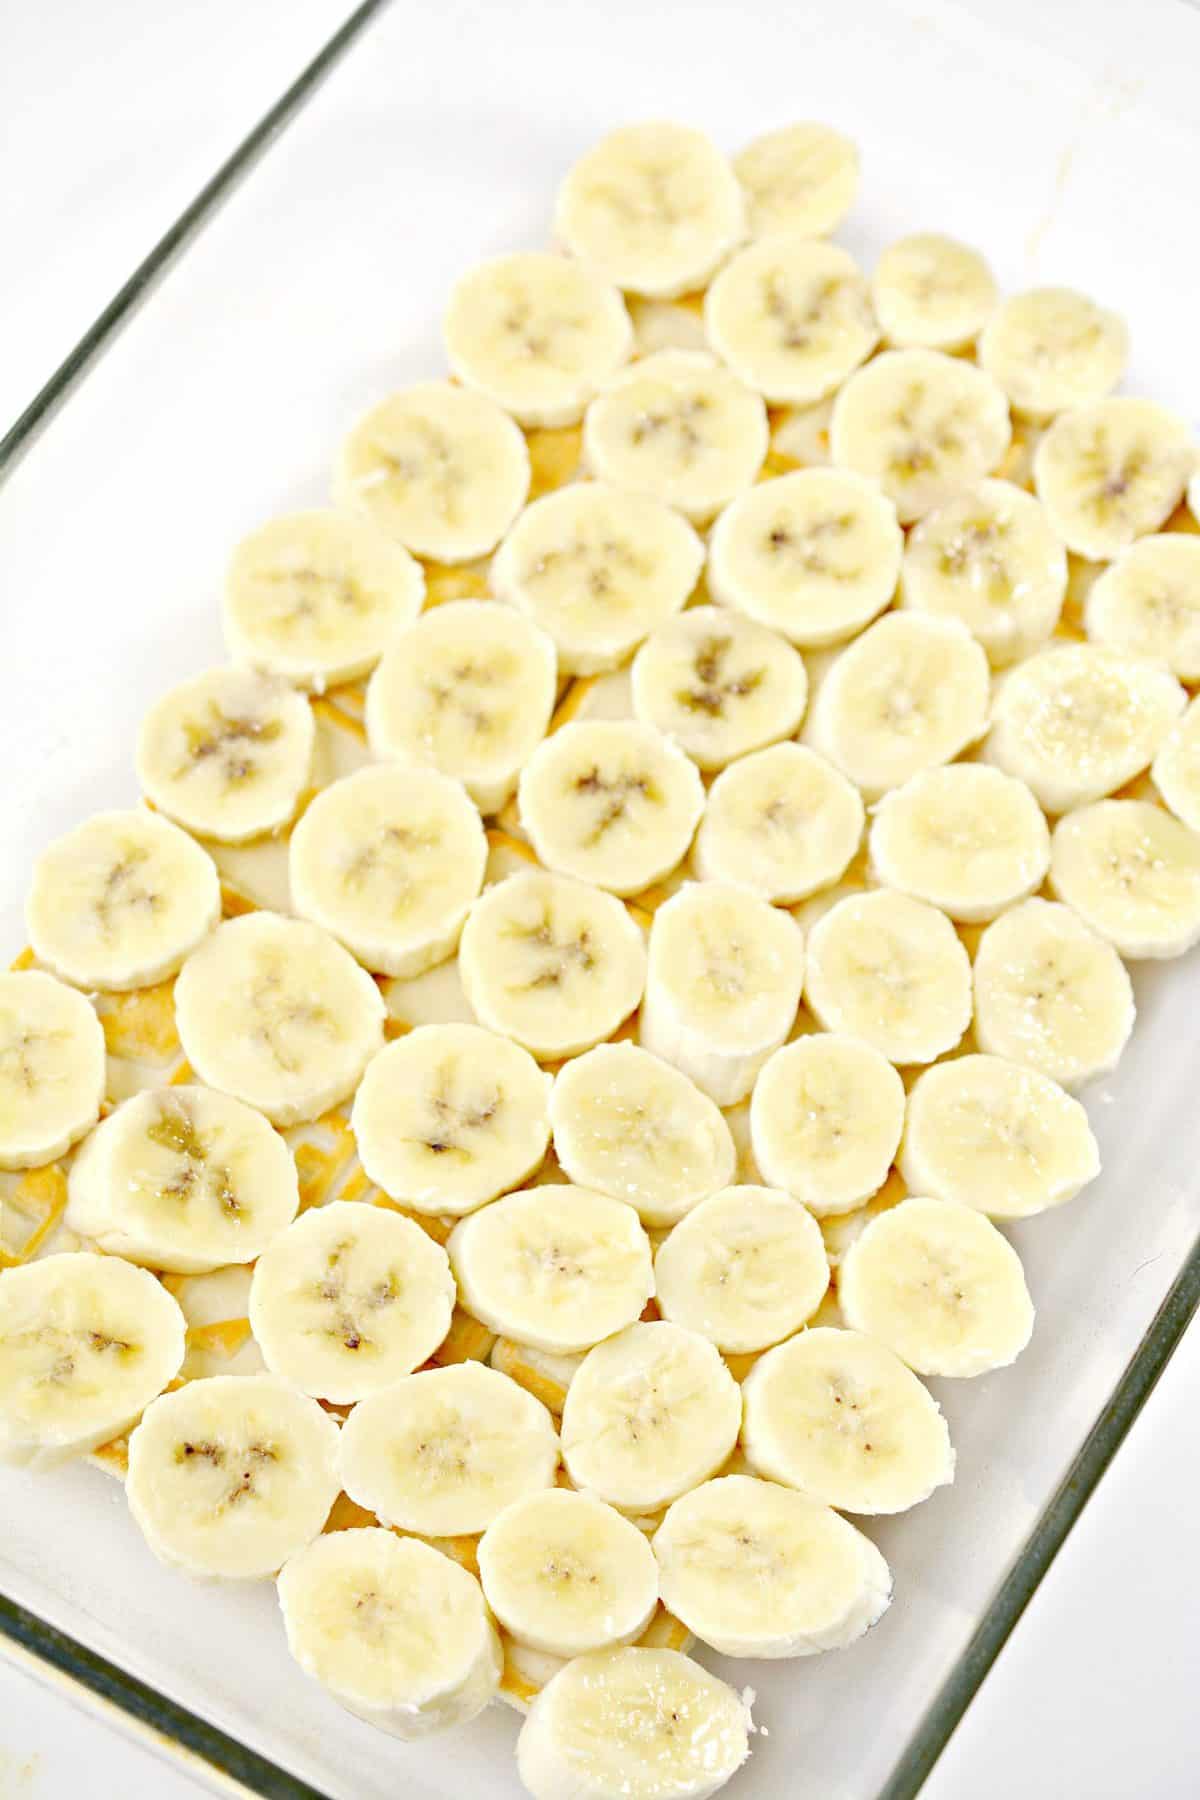 Top the cookies with a layer of sliced bananas.